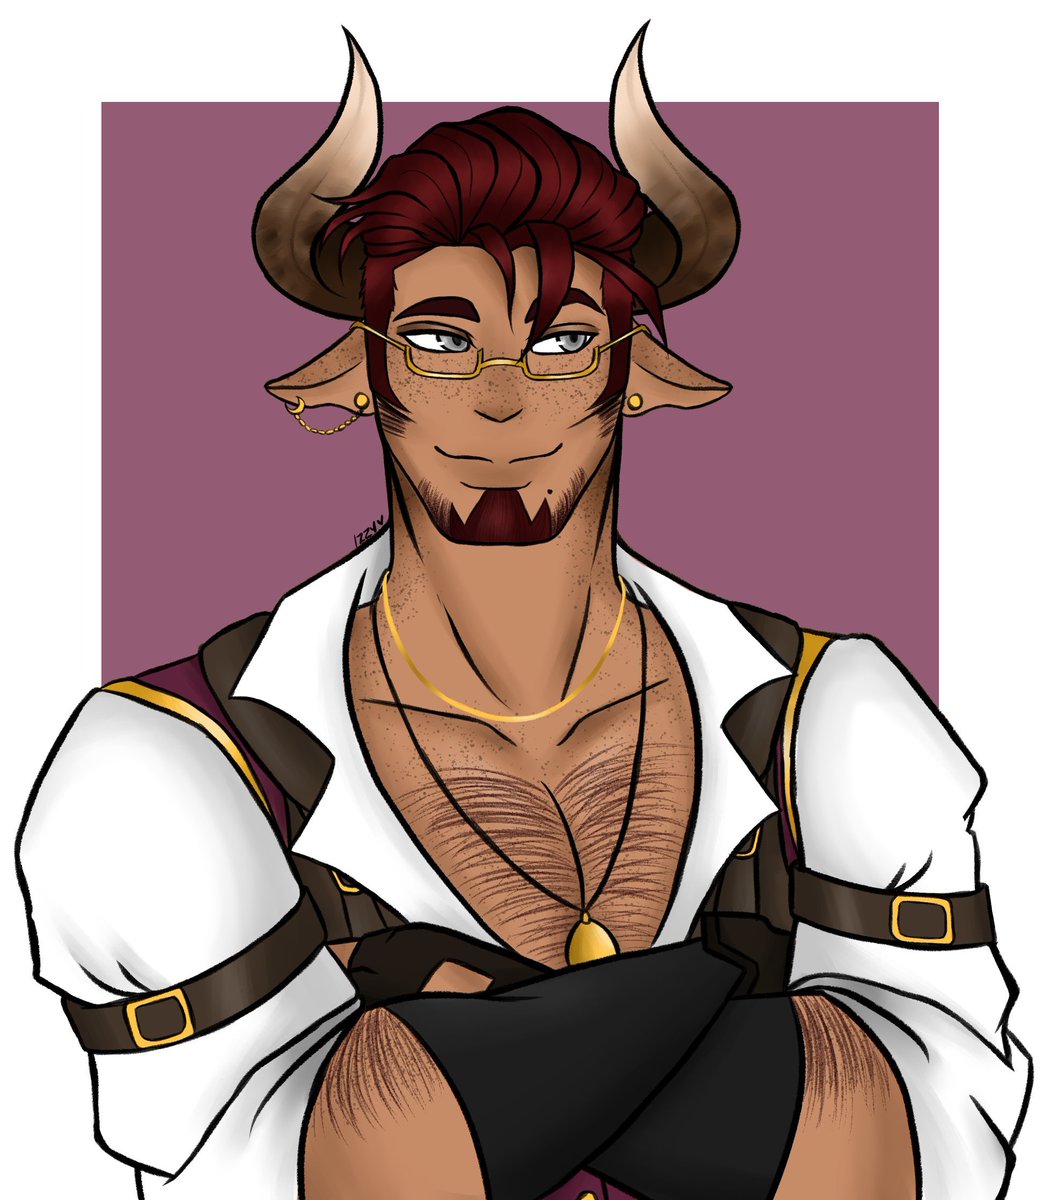 Leto, granblue fantasy oc, but can be reworked to be a tiefling or fantasy oc. hes a big guy who doesnt know his own strength, but despite that he prefers to use his mind and hes very very smart. hes a nice guy who flusters easily and oblivious to social cues. pansexual